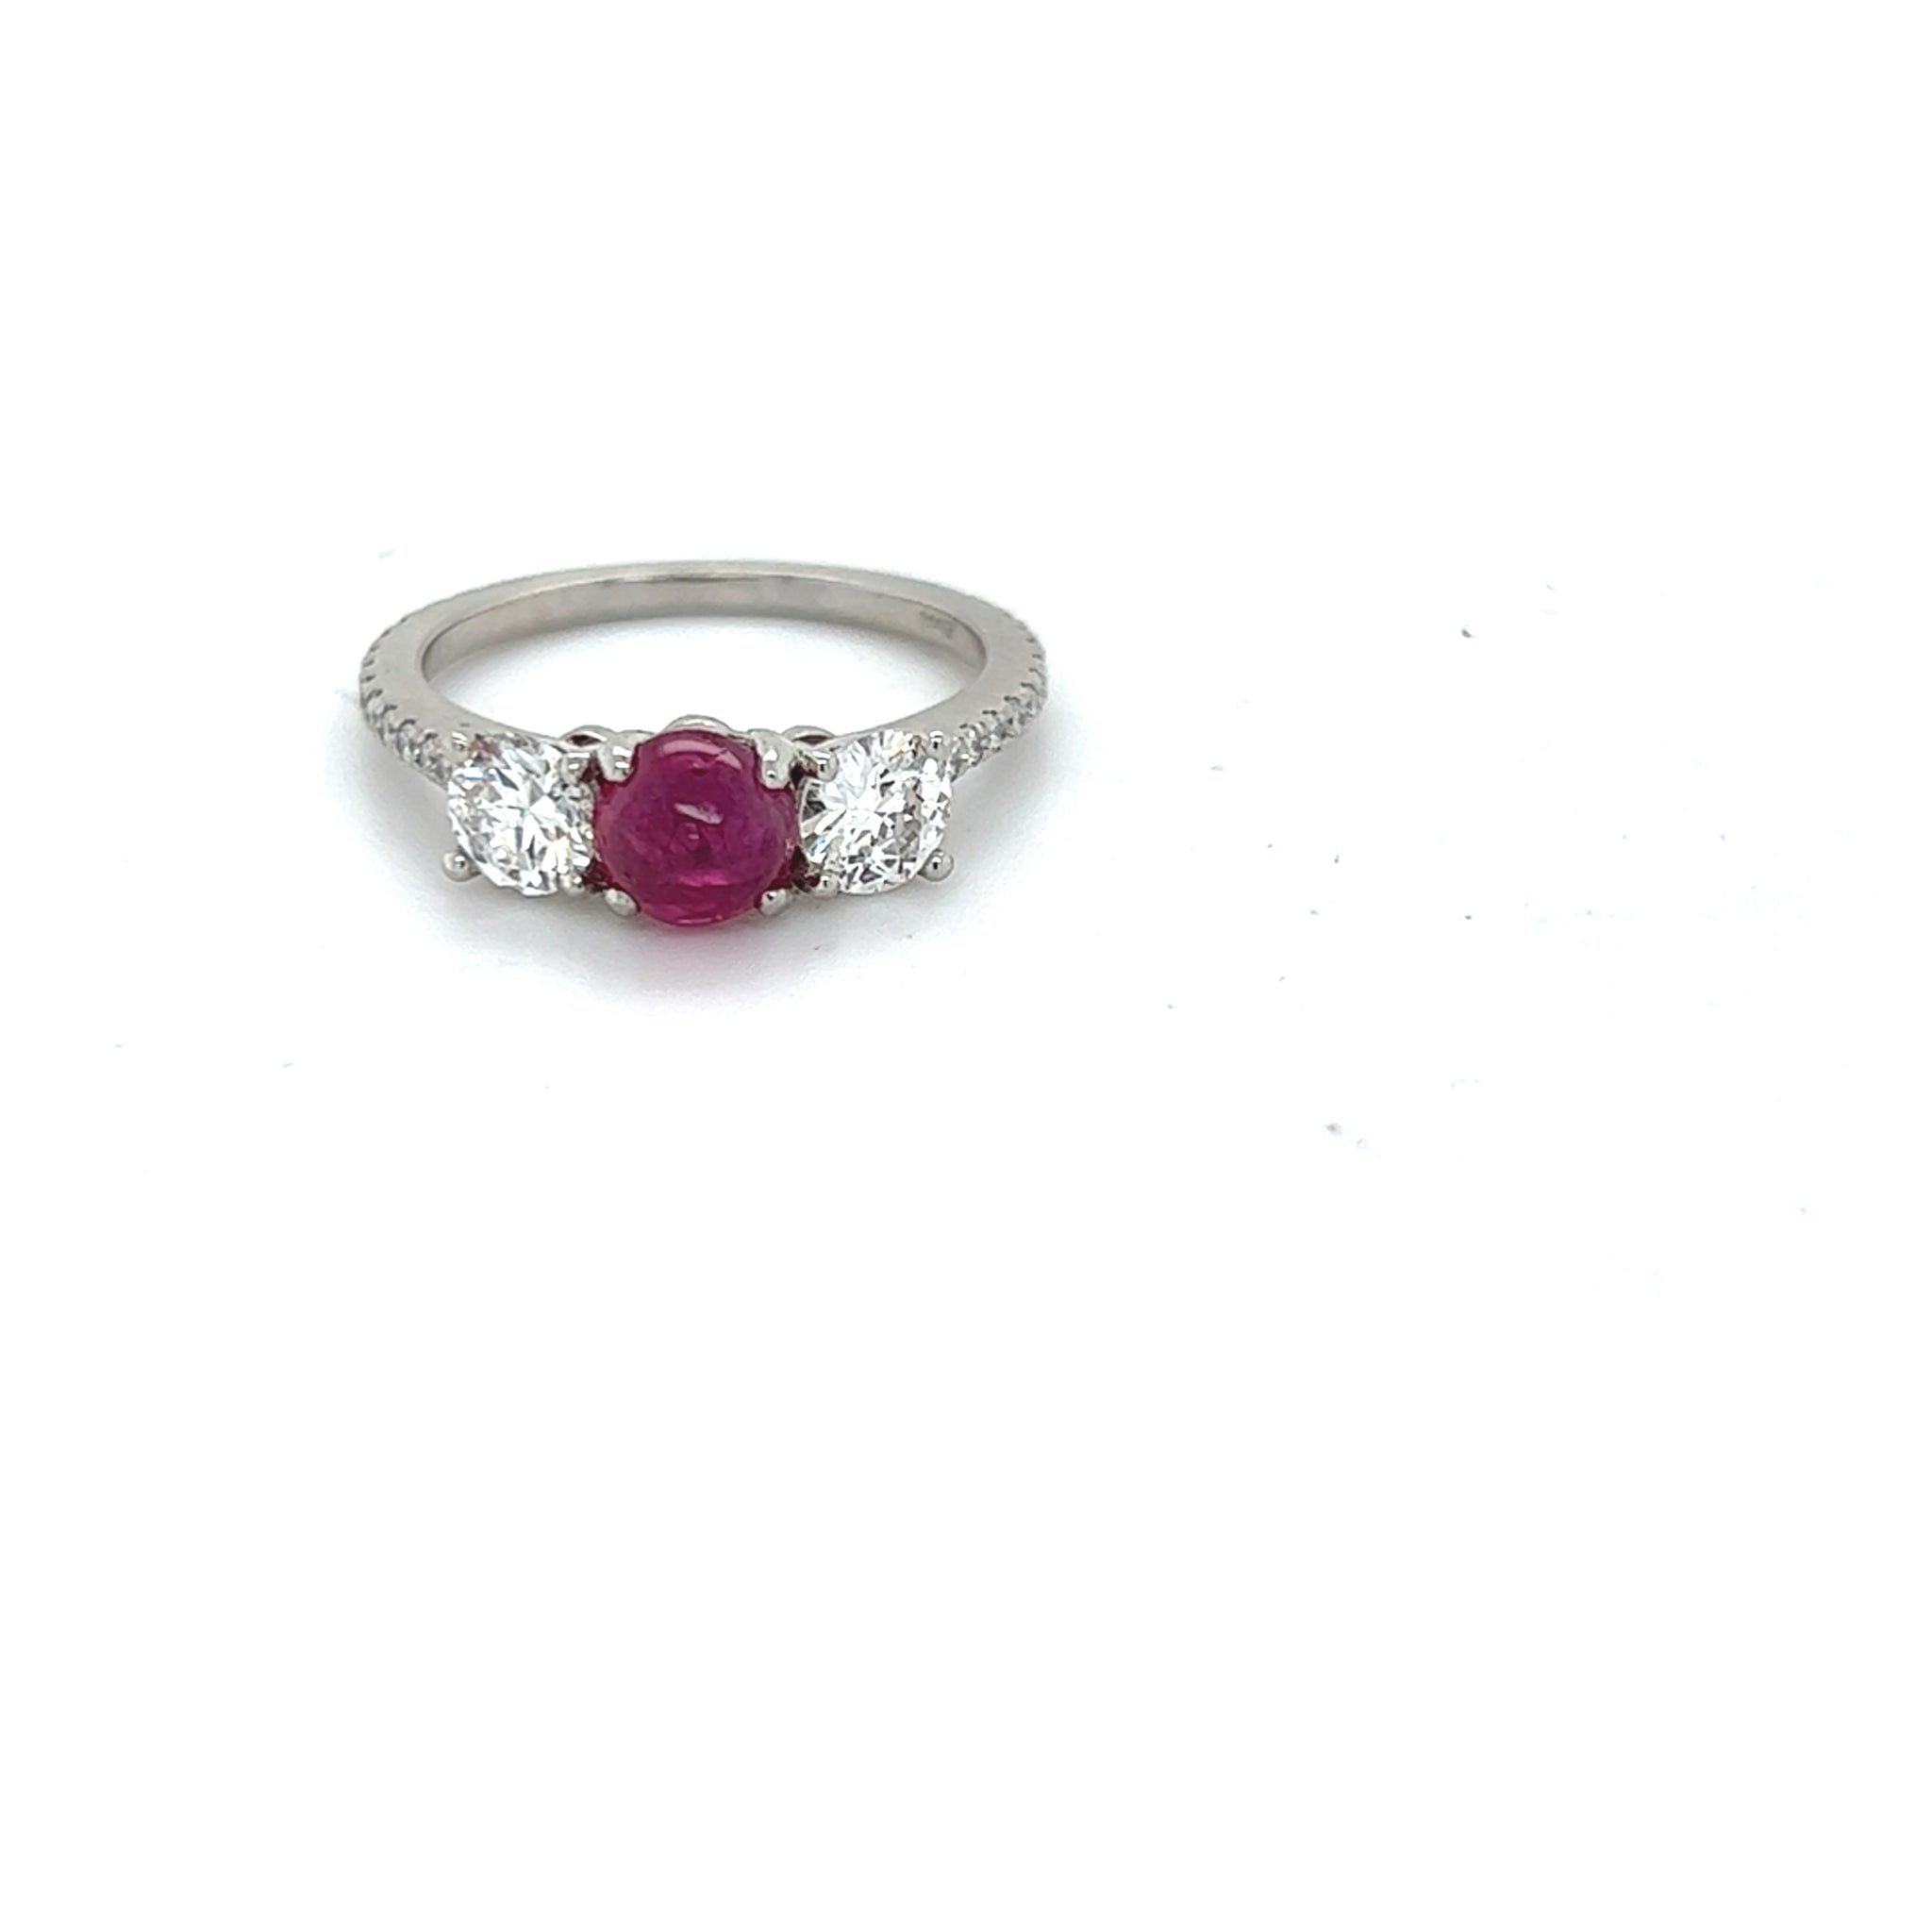 Low Profile 3 Stone Cabochon Burmese Ruby and Diamond Stacking Ring